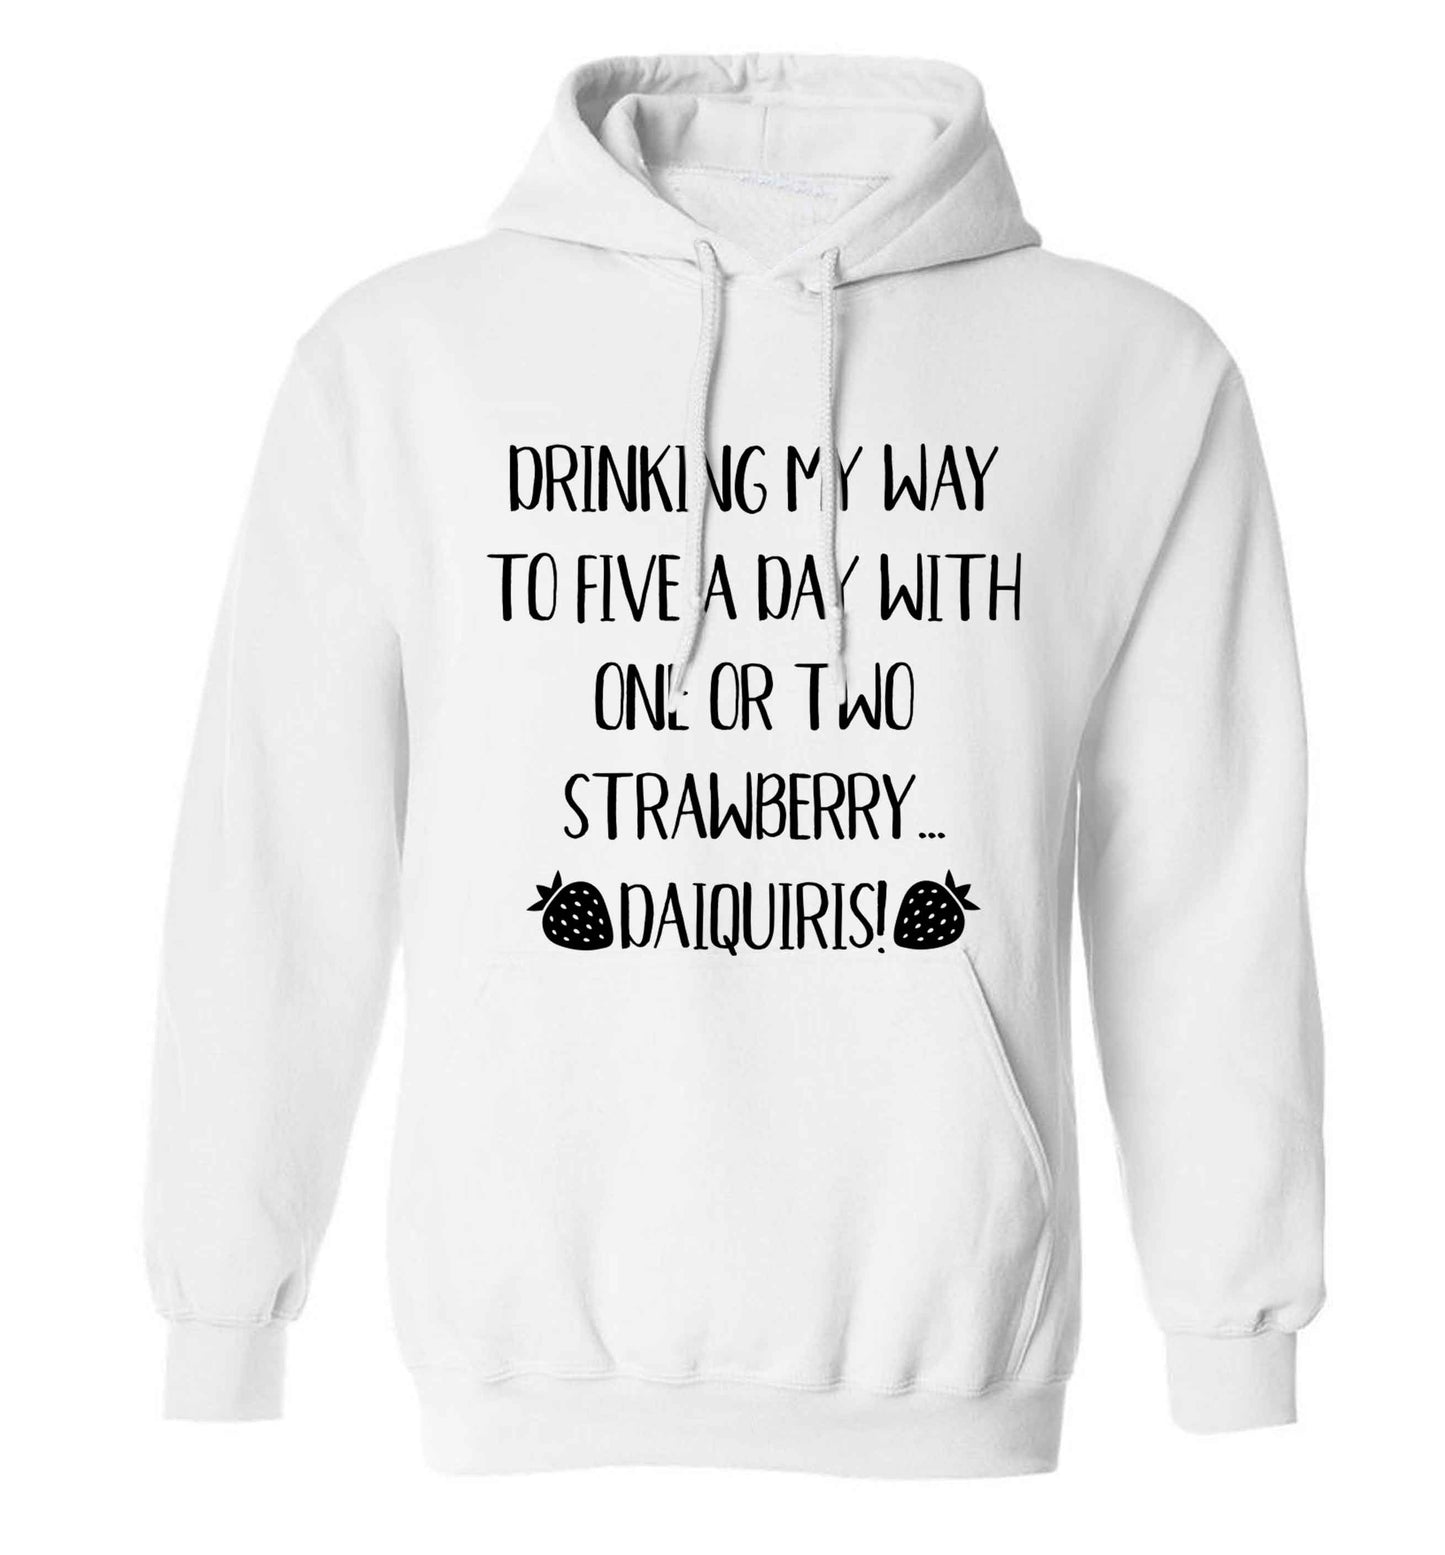 Drinking my way to five a day with one or two straberry daiquiris adults unisex white hoodie 2XL